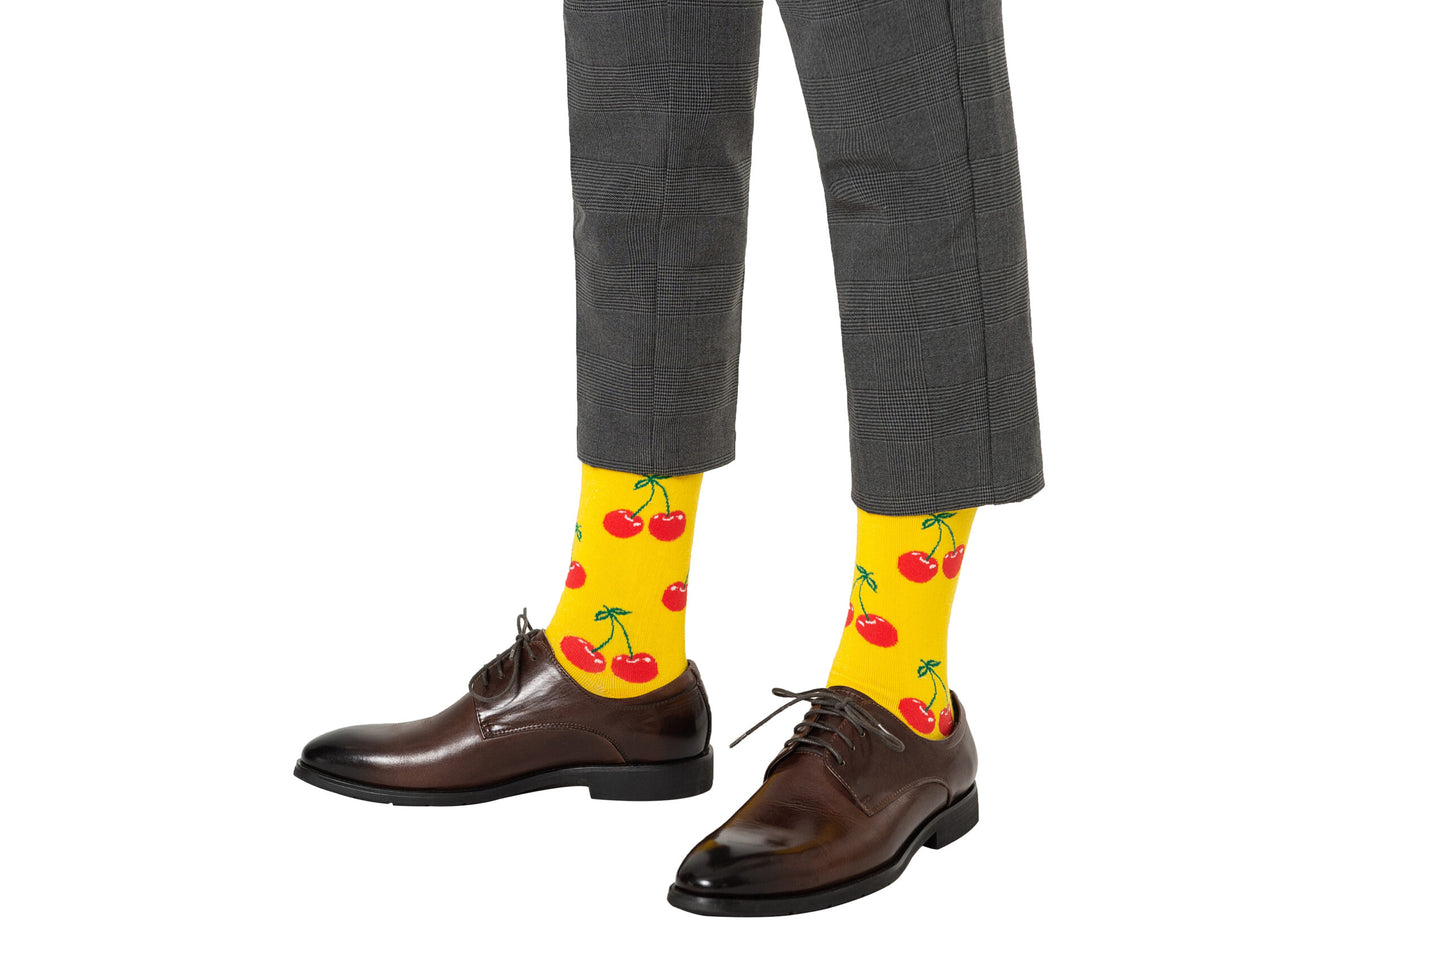 A man wearing a pair of Cherry Socks.